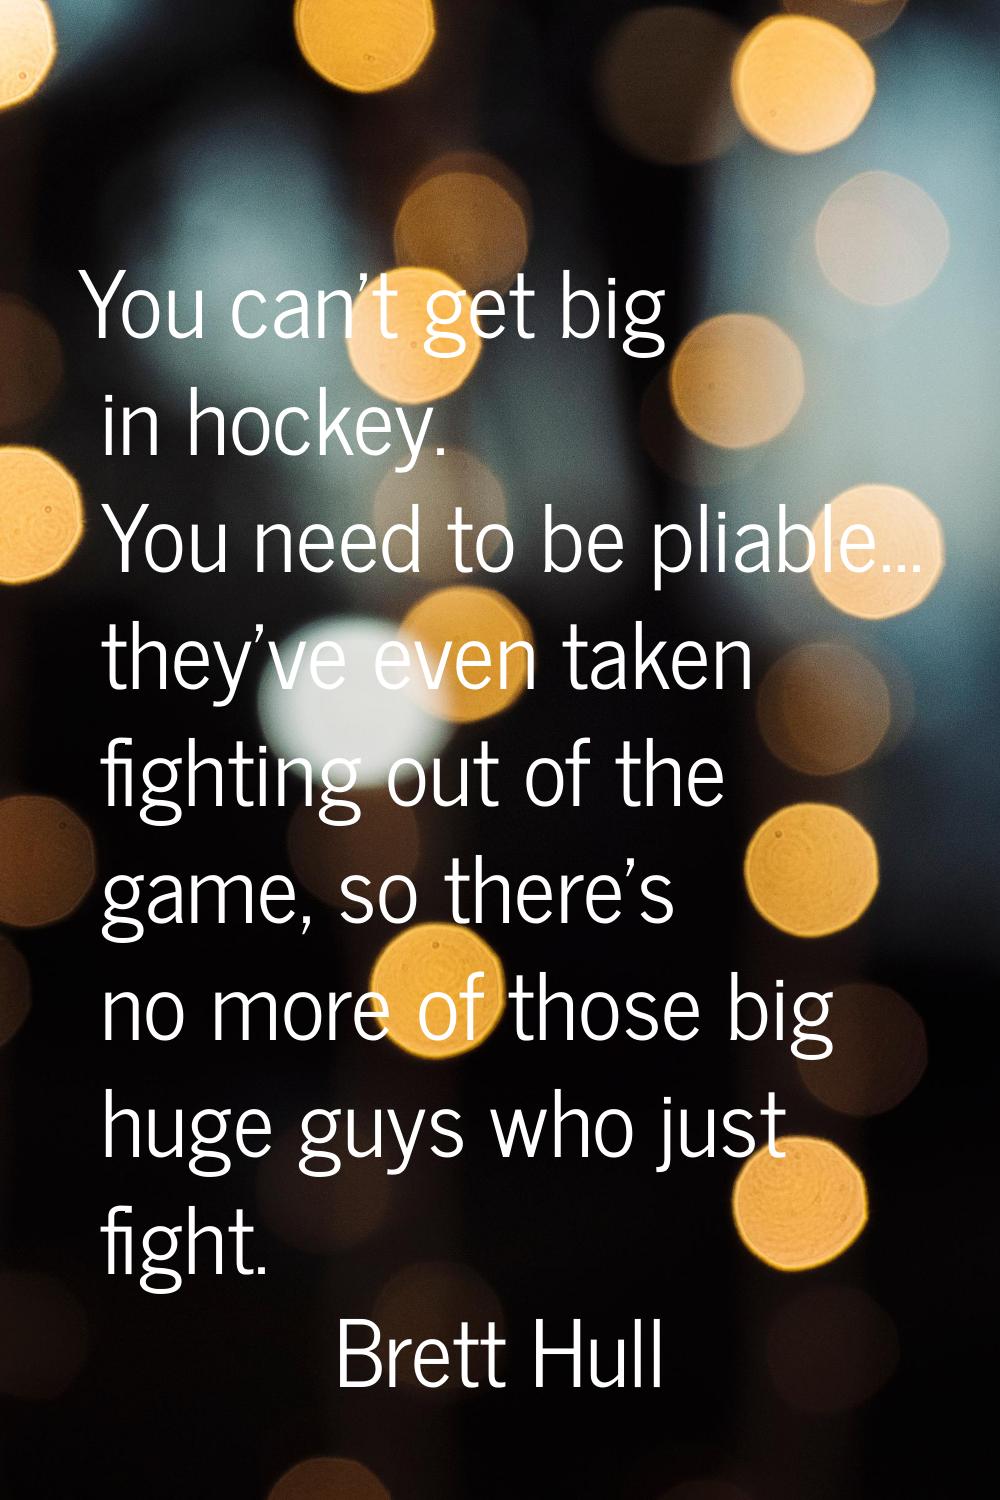 You can't get big in hockey. You need to be pliable... they've even taken fighting out of the game,